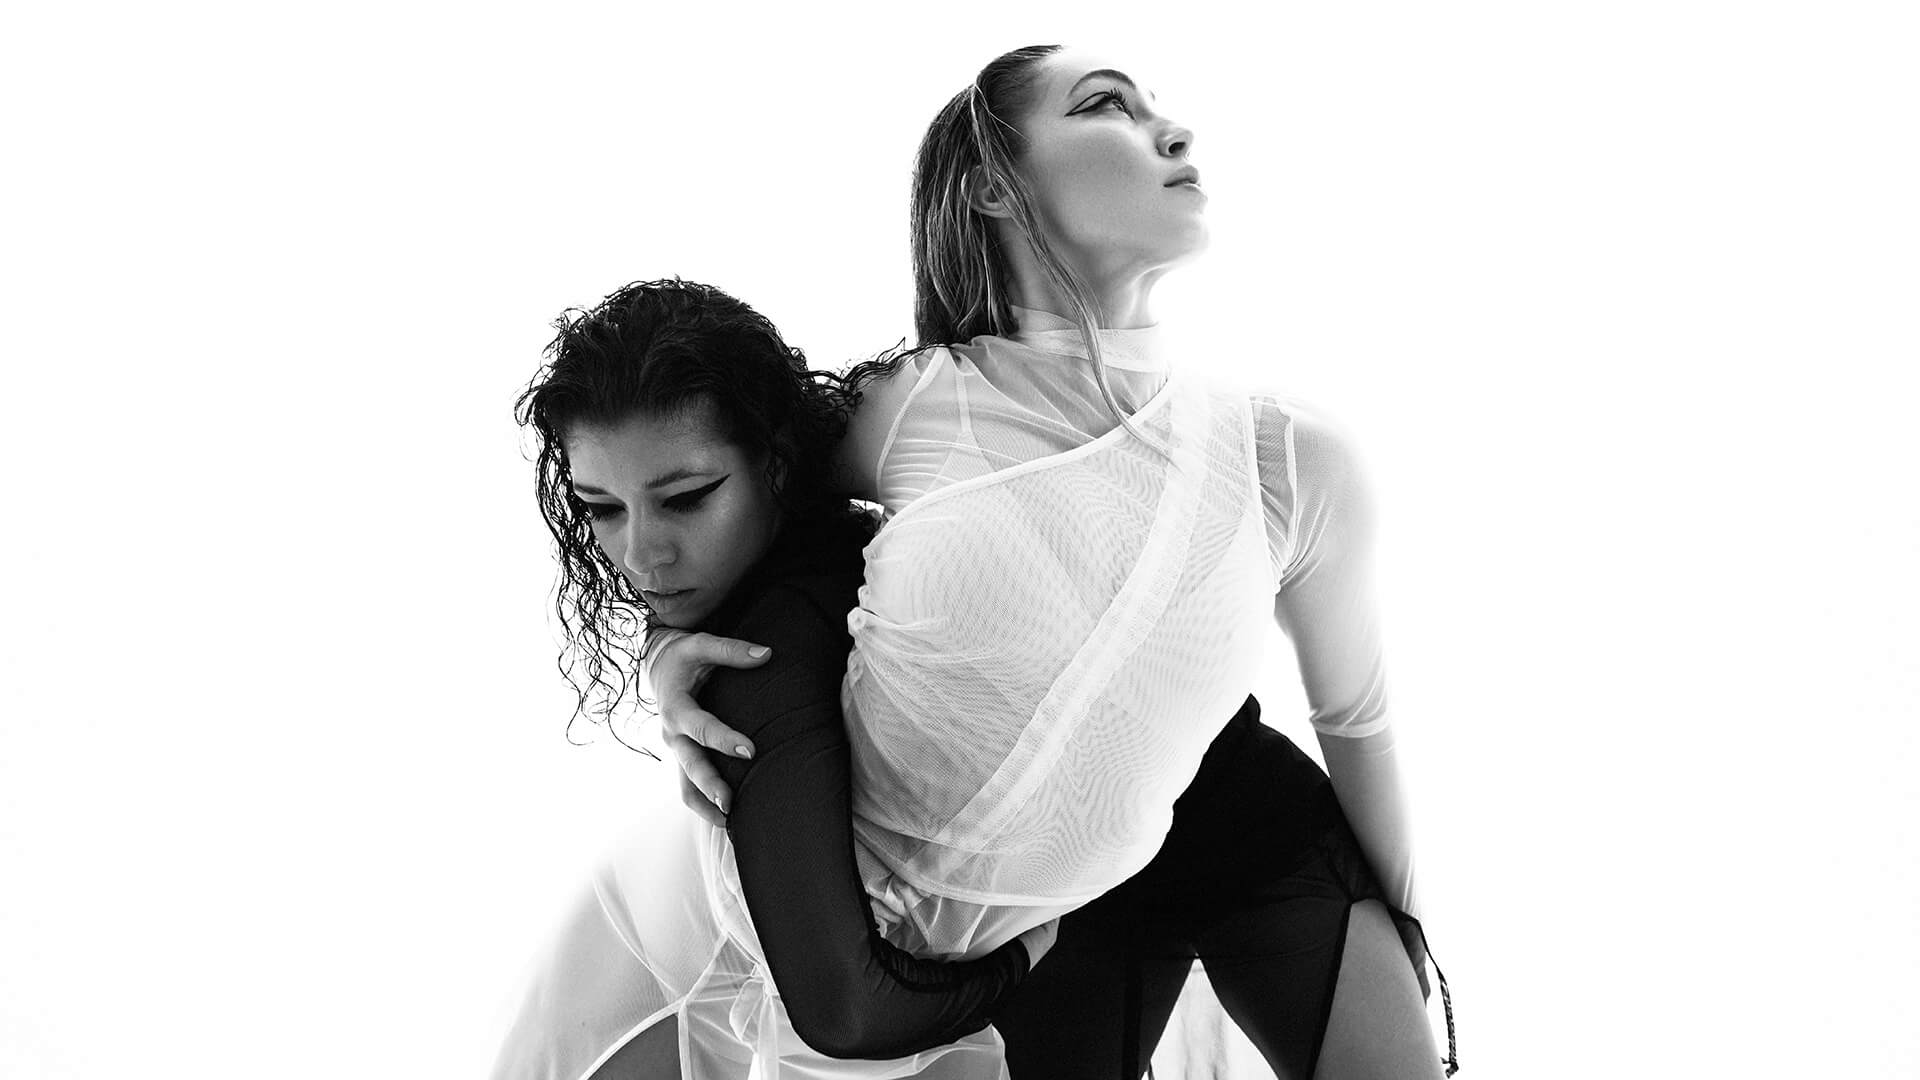 Black and white photo of two intertwined female dancers, one in black, on the left, and the other in white, on the right.